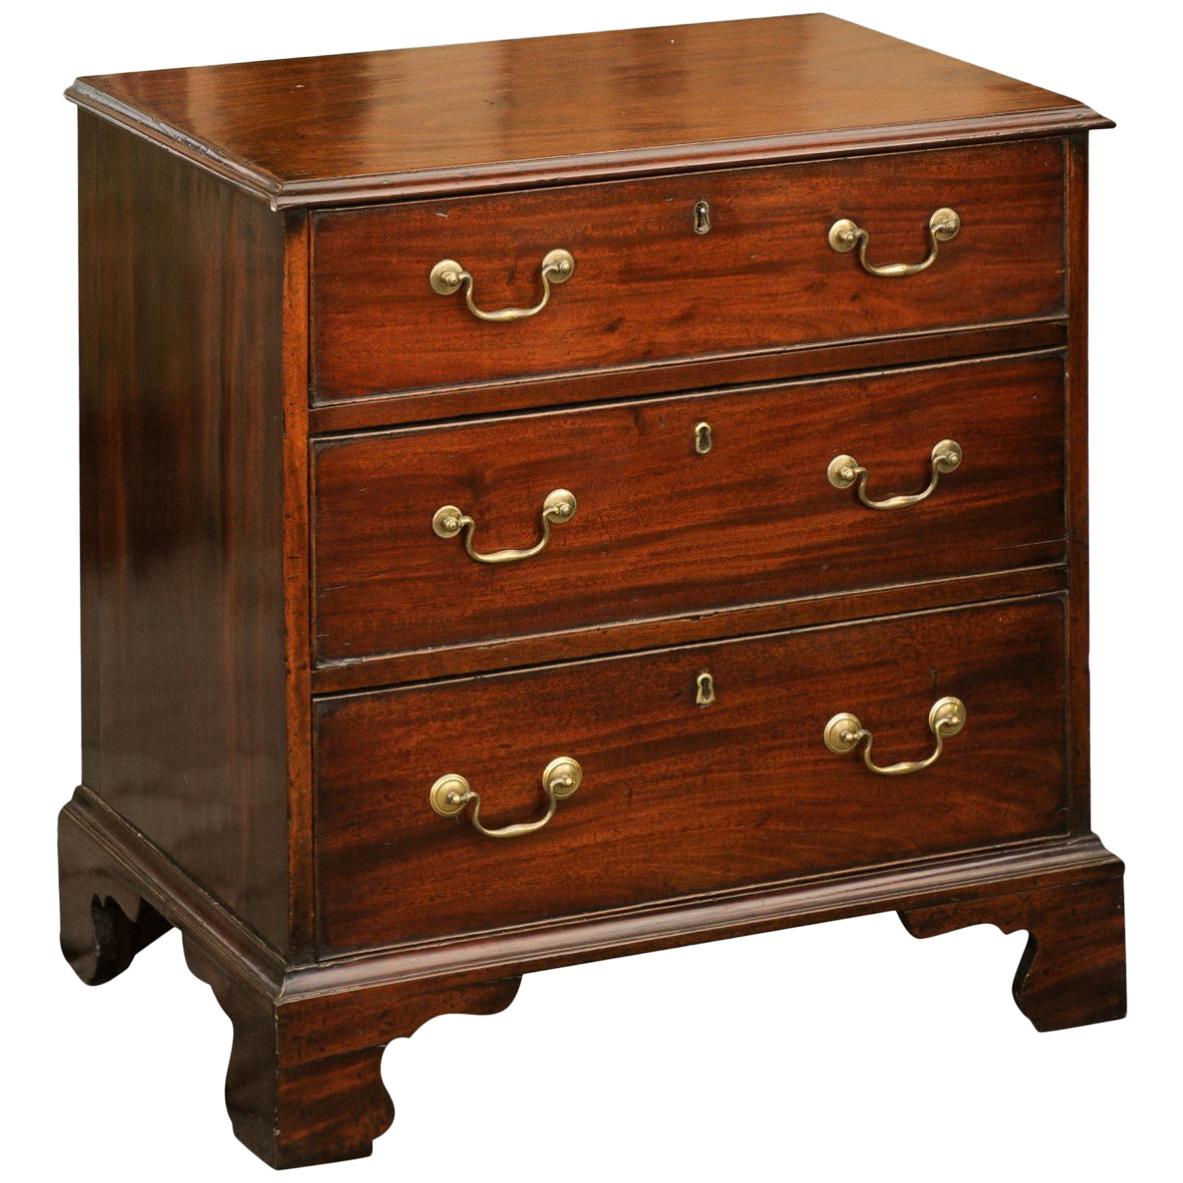 English Mahogany Bachelor's Chest with Three Graduated Drawers, Mid-19th Century